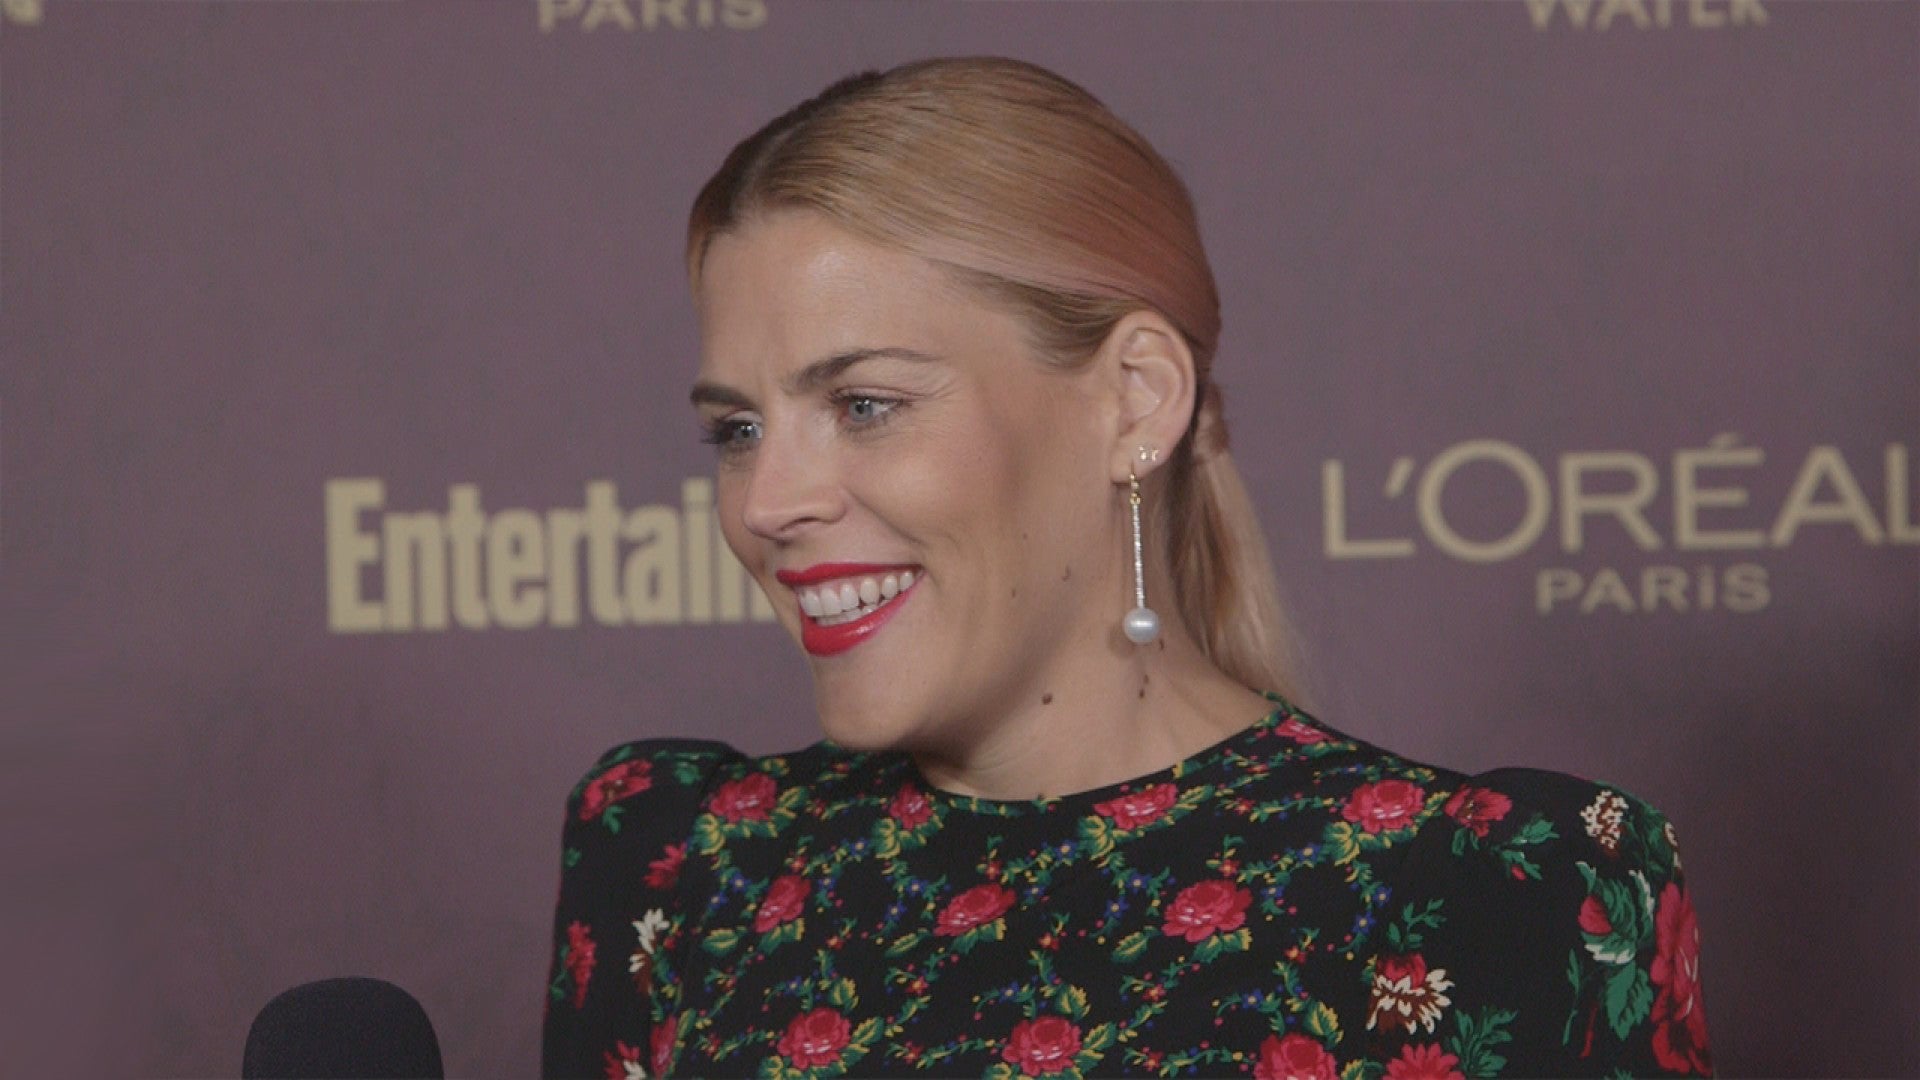 Busy Philipps recreates her iconic dance-off scene from White Chicks with  co-stars Jaime King